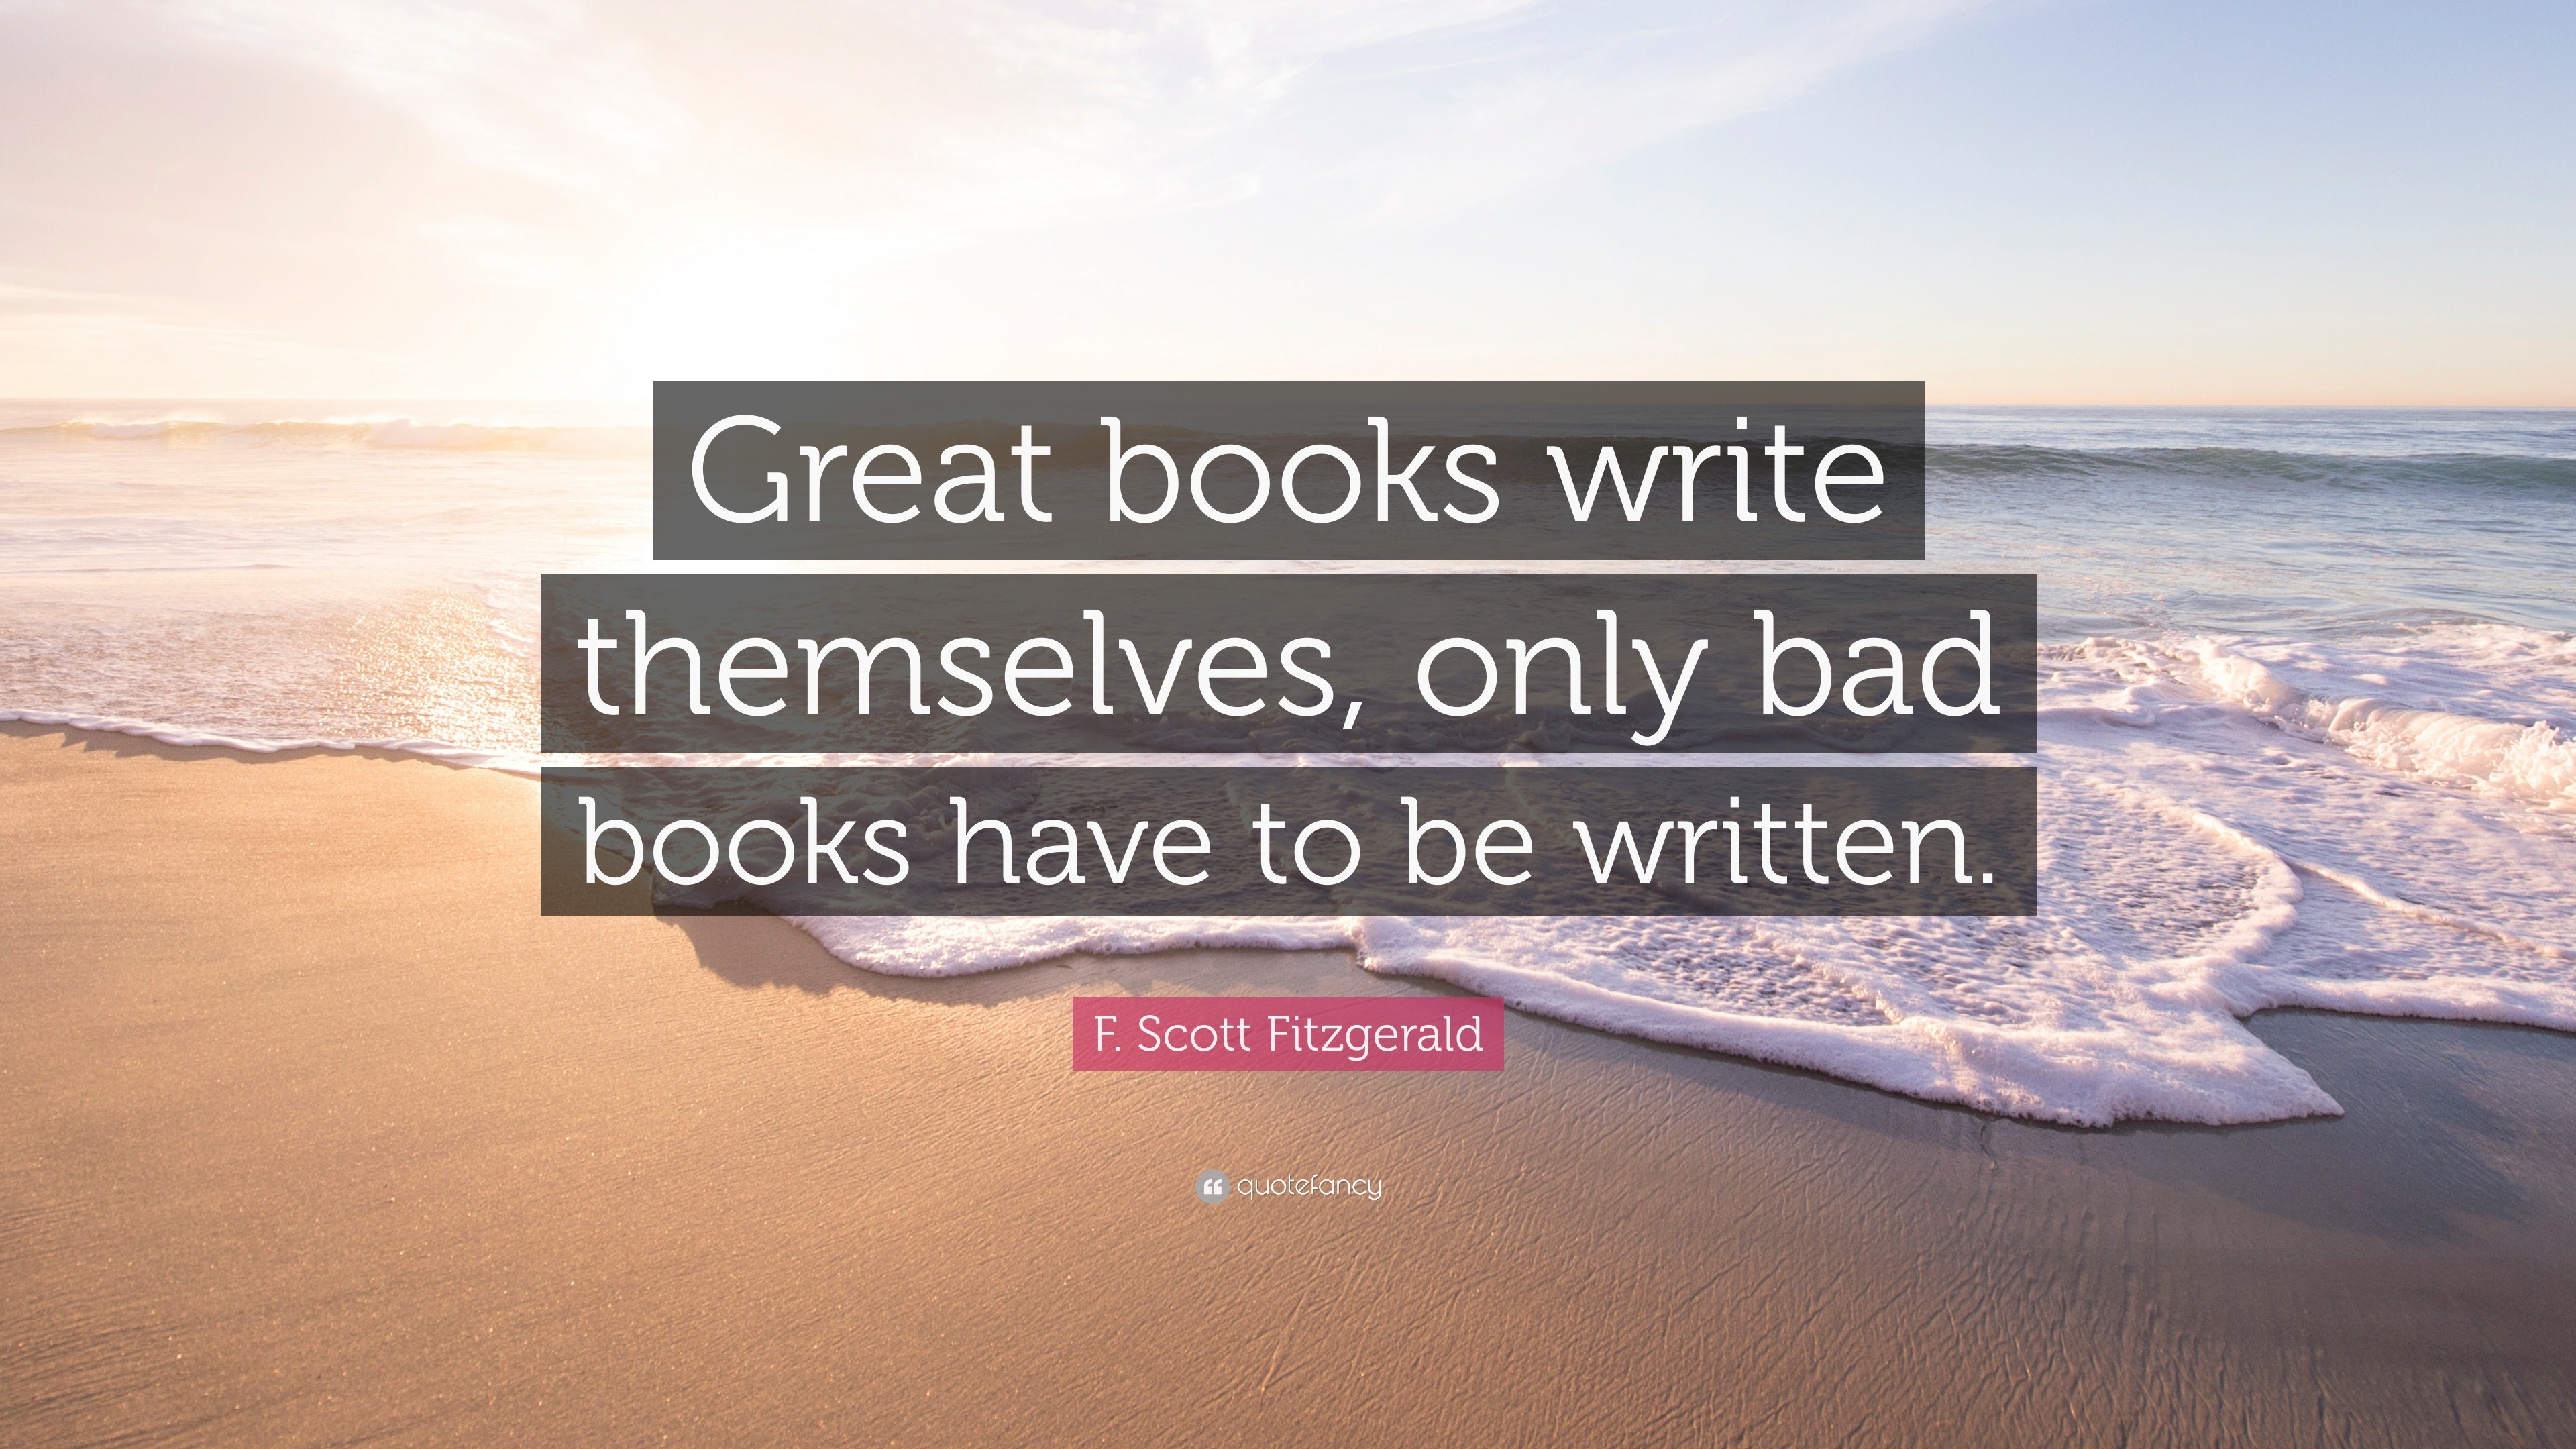 F. Scott Fitzgerald Quote: “Great books write themselves, only bad